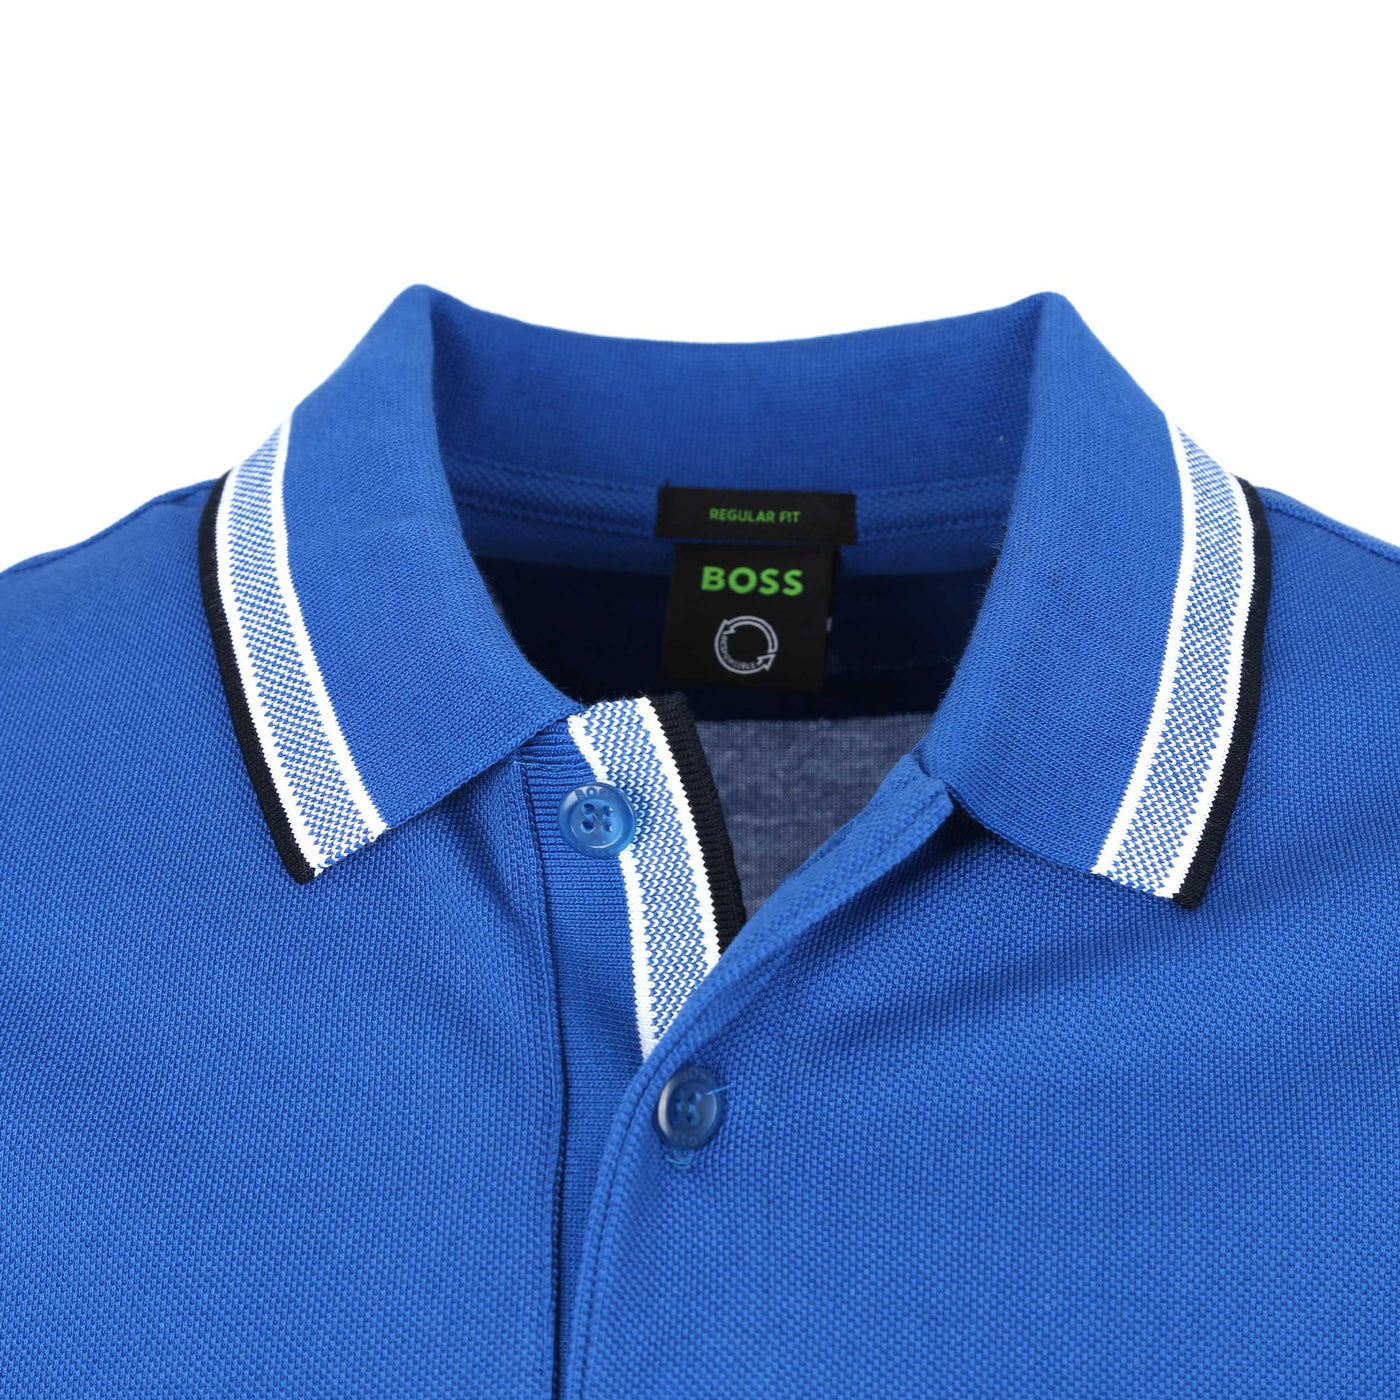 BOSS Paddy Polo Shirt in Bright Blue Collar